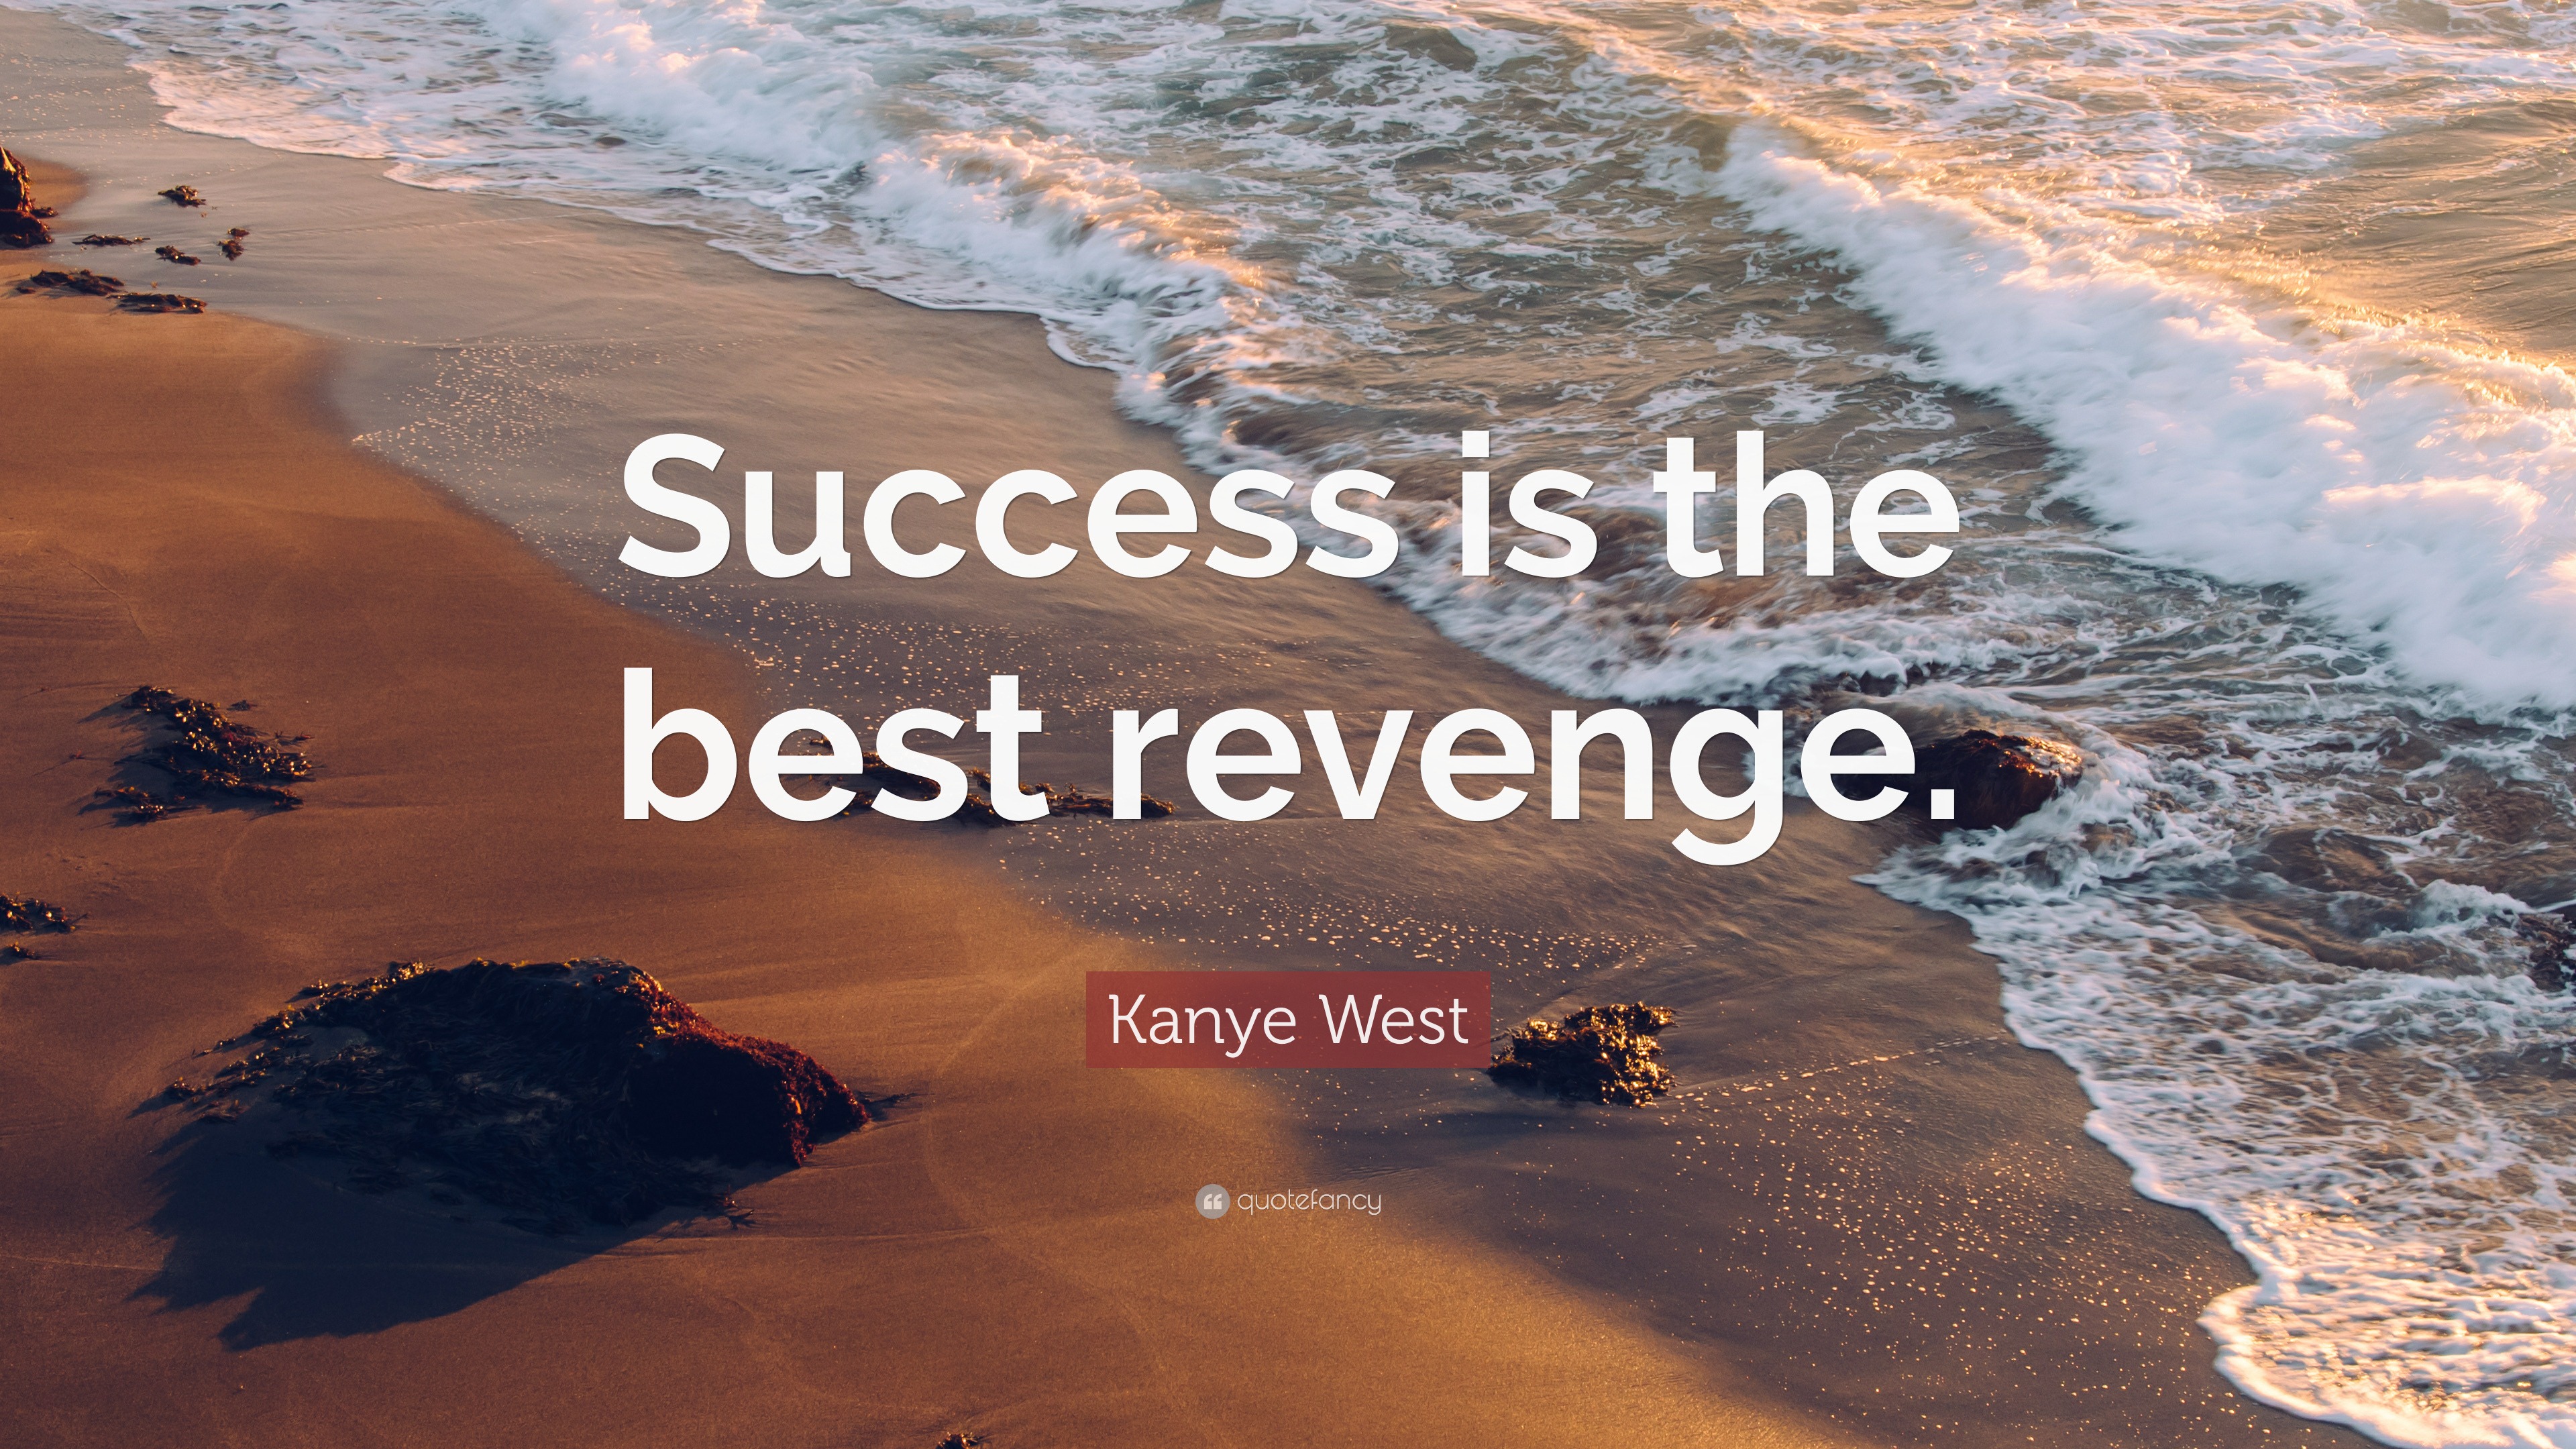 Kanye West Quote “Success is the best revenge.”